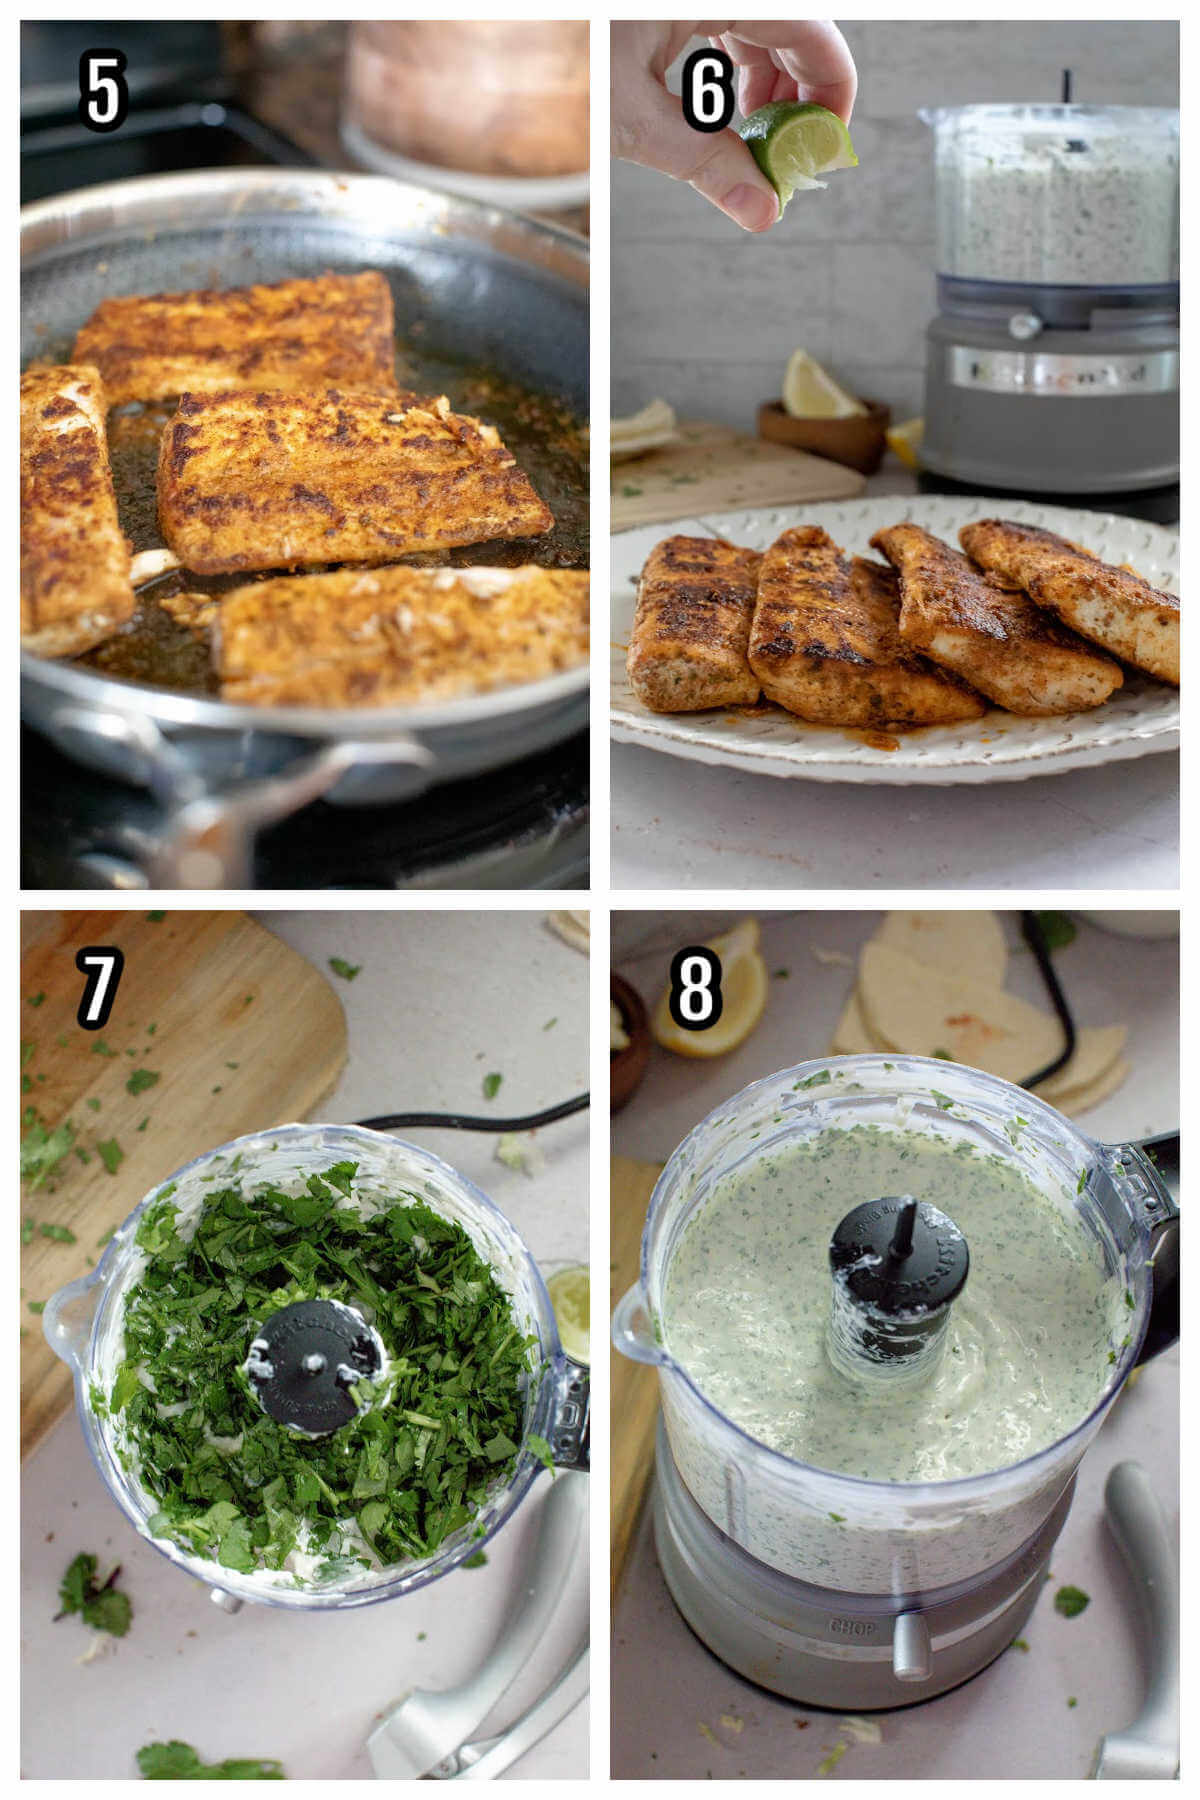 Second set of 4 steps to making the fish Tacos with Cilantro Lime Sauce. 